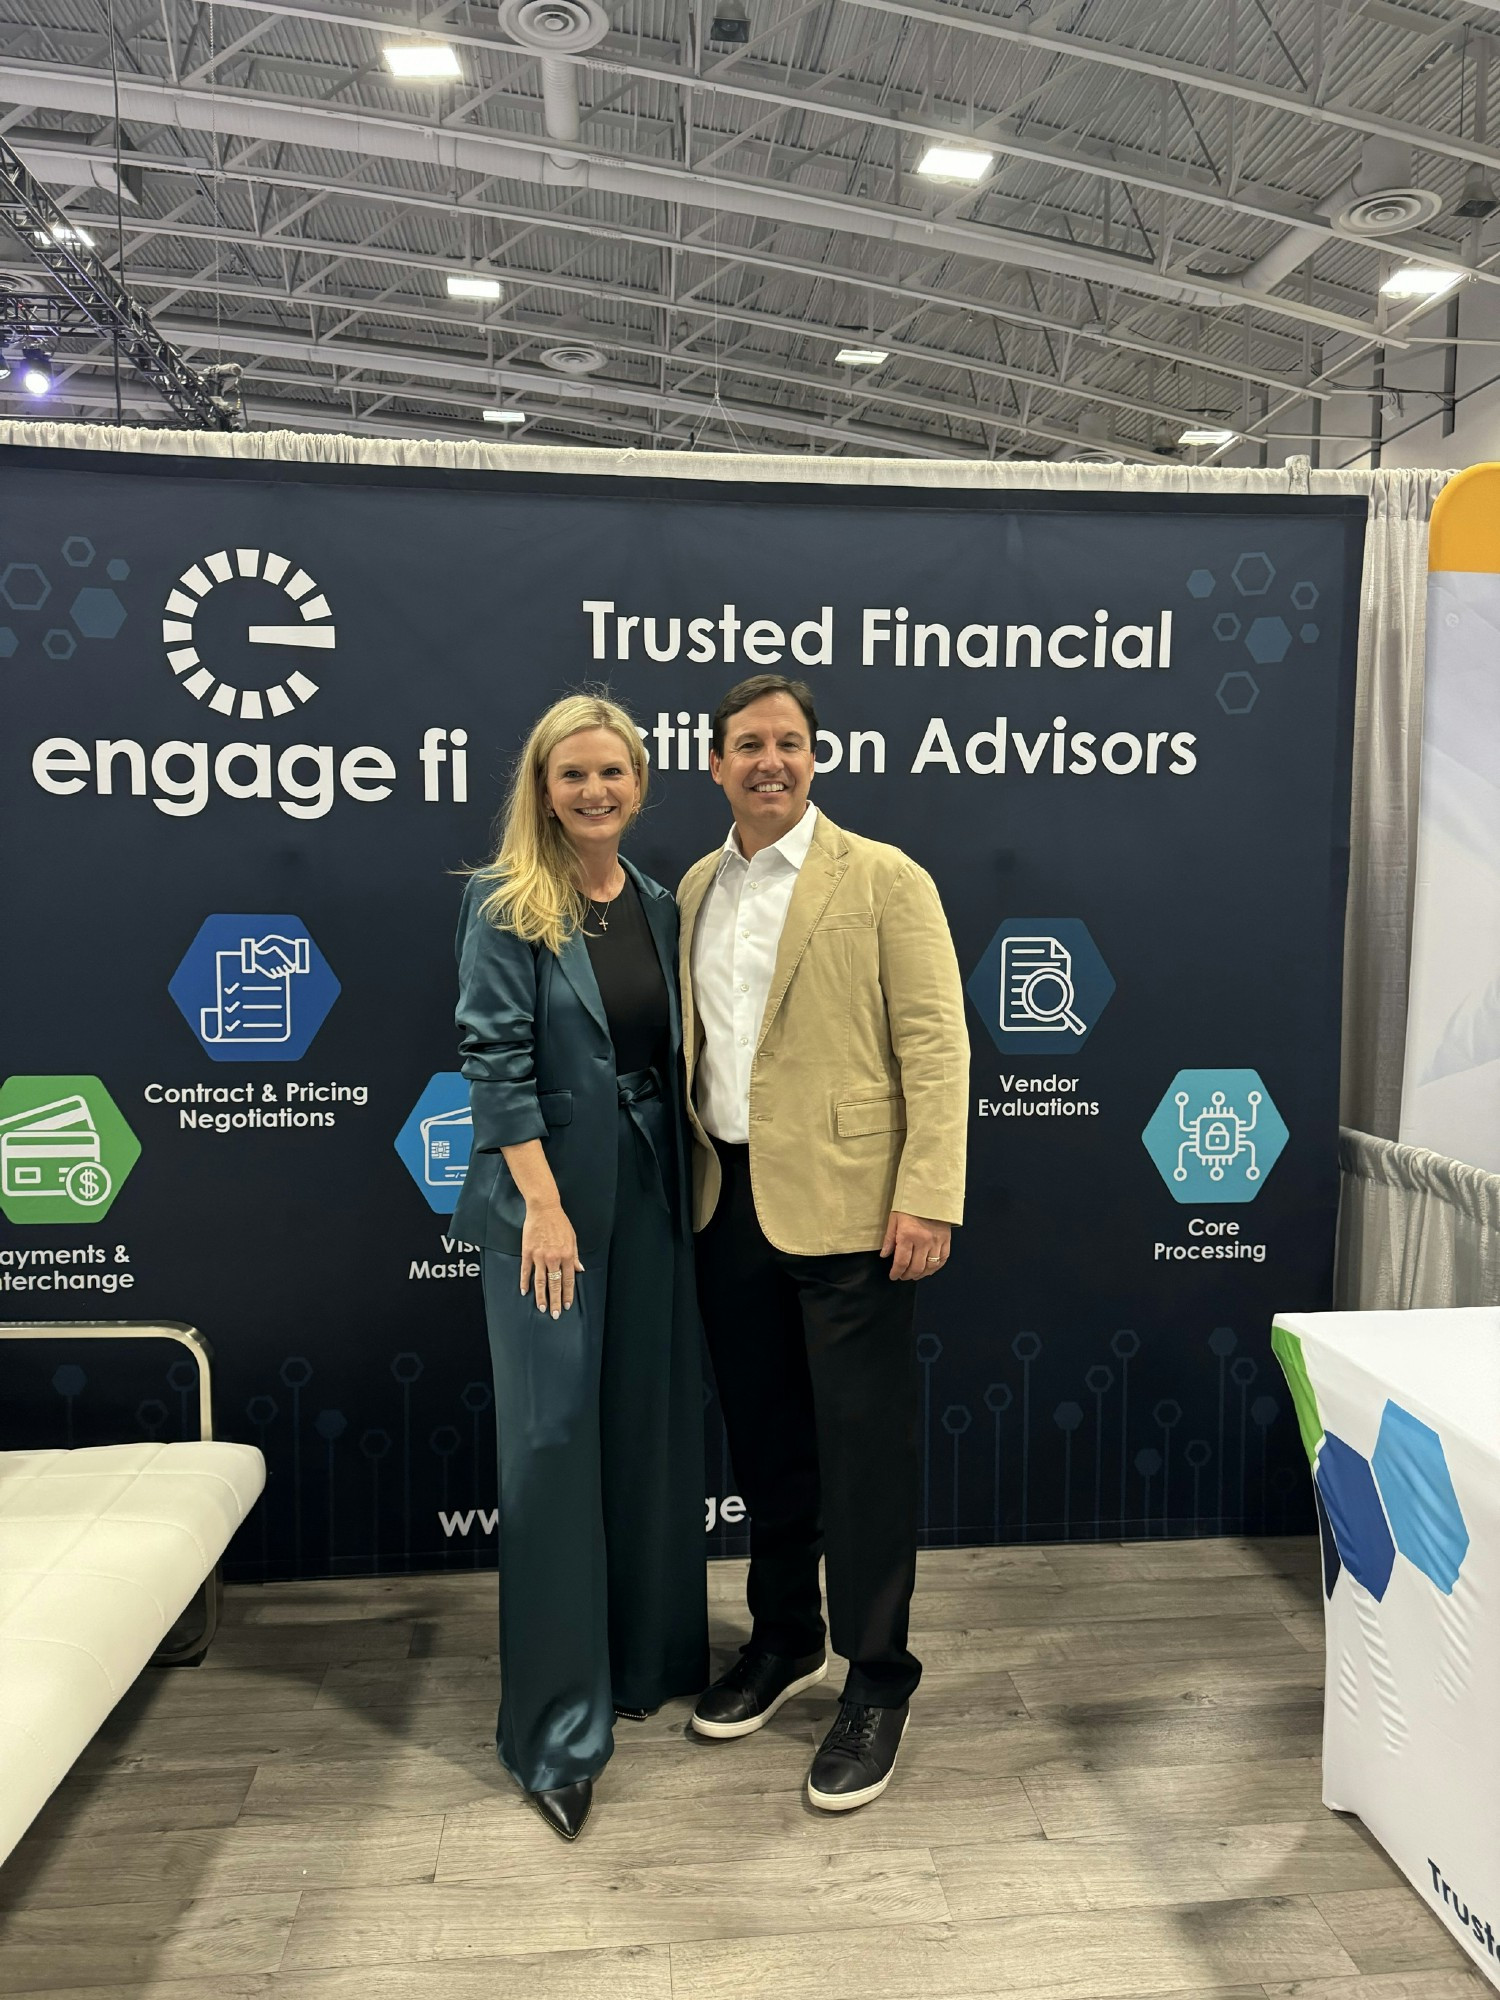 Engage fi Co-Founder & CEO, Jennifer Addabbo, and President & COO, Andres Pasantes, at the CUNA GAC Conference.